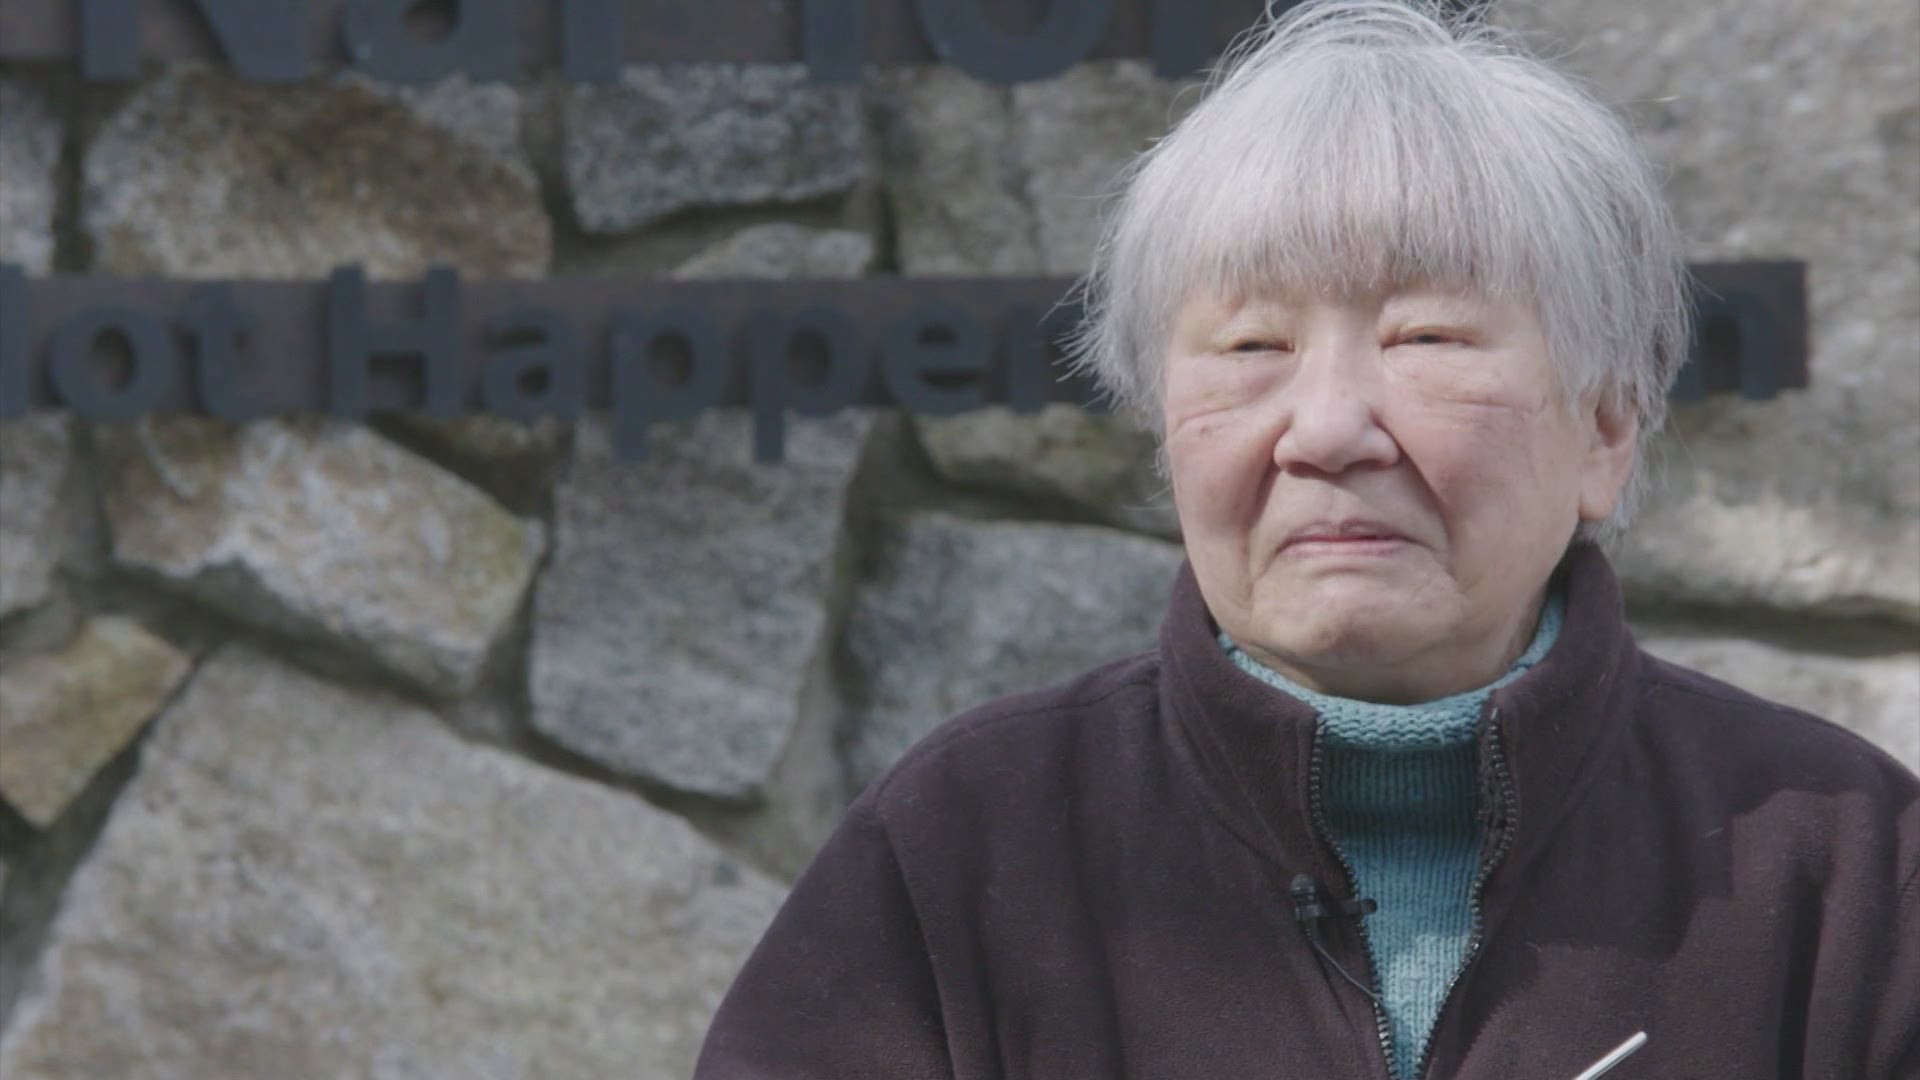 Lilly Kodama was a young girl on Bainbridge Island when she was told one day that she and her family needed to leave.